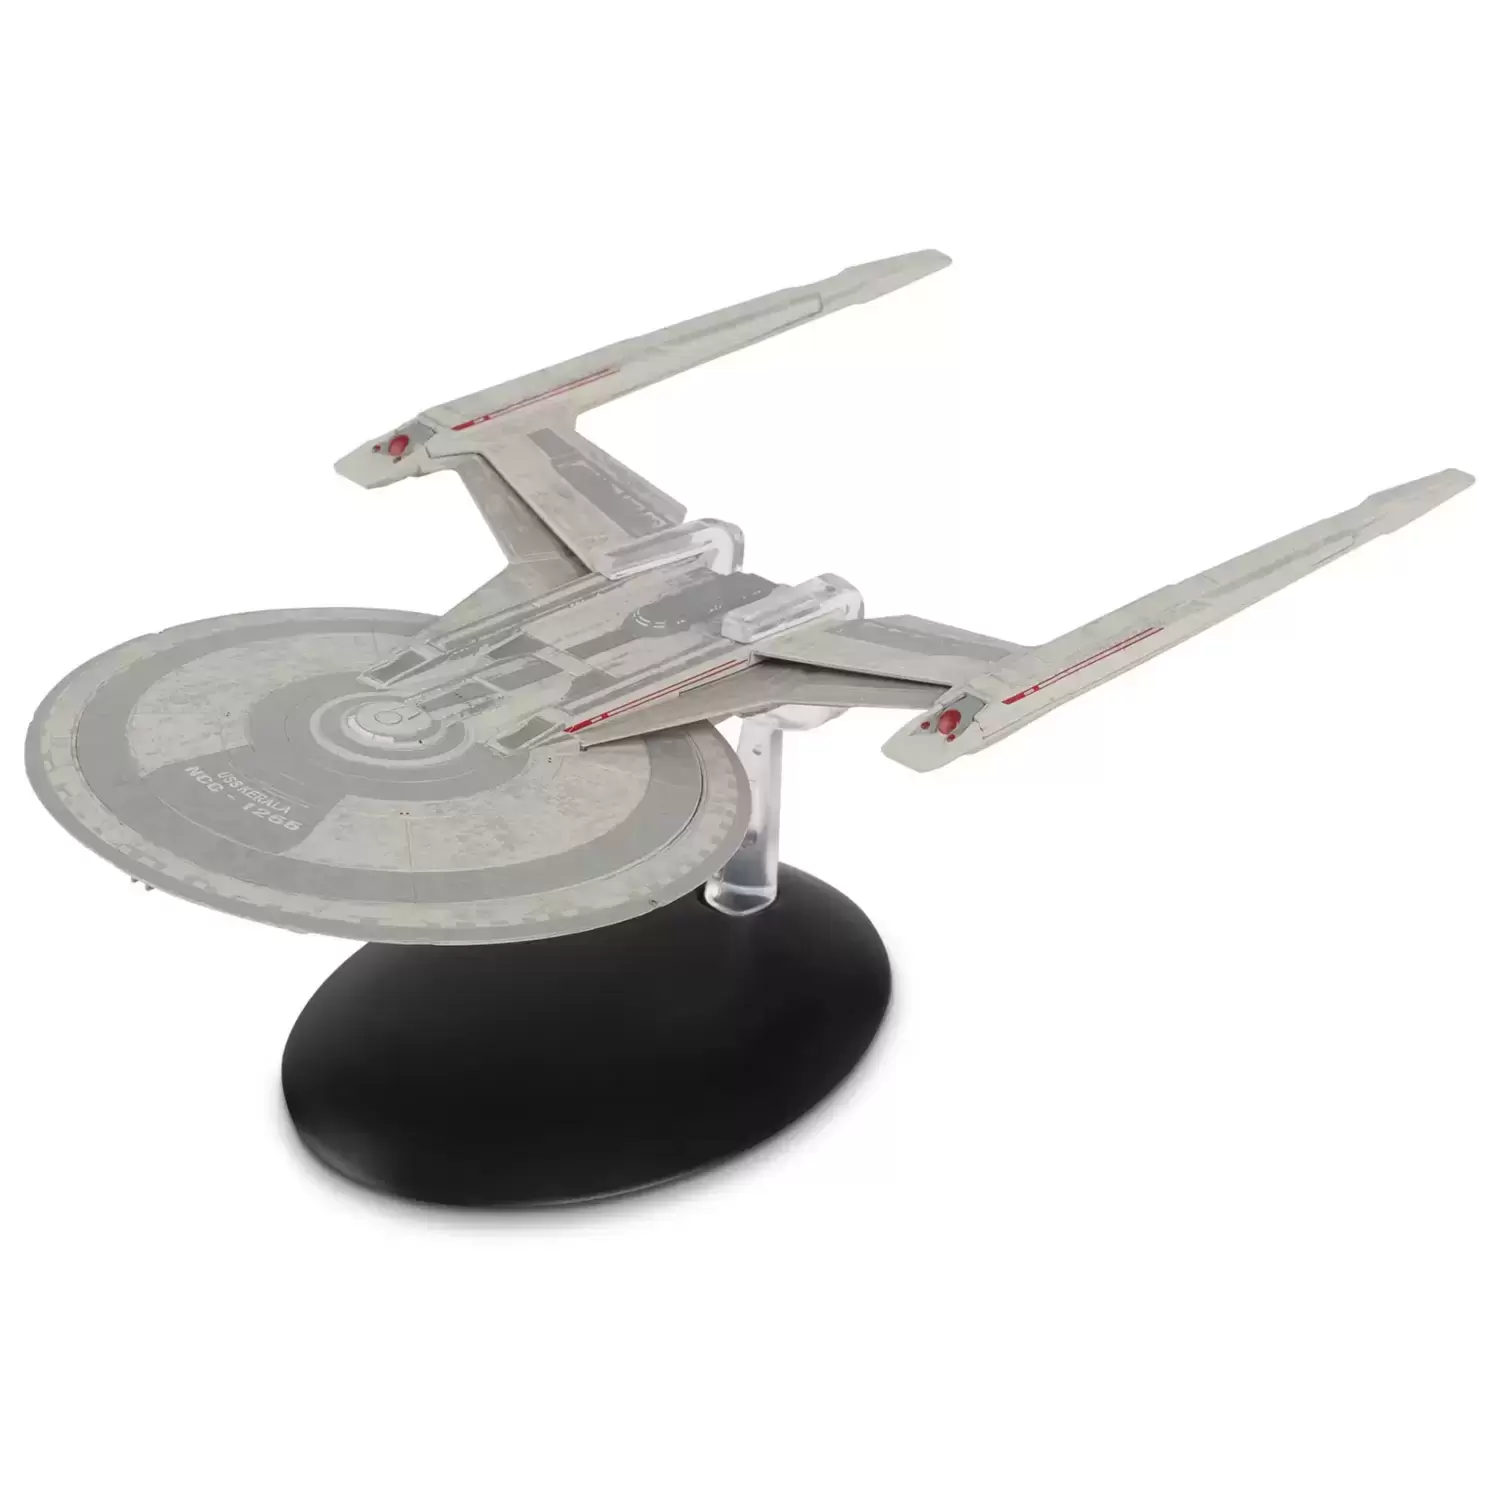 Star Trek Discovery The Official Starships Collection - U.S.S. Kerala NCC-1255 (Shepard class)